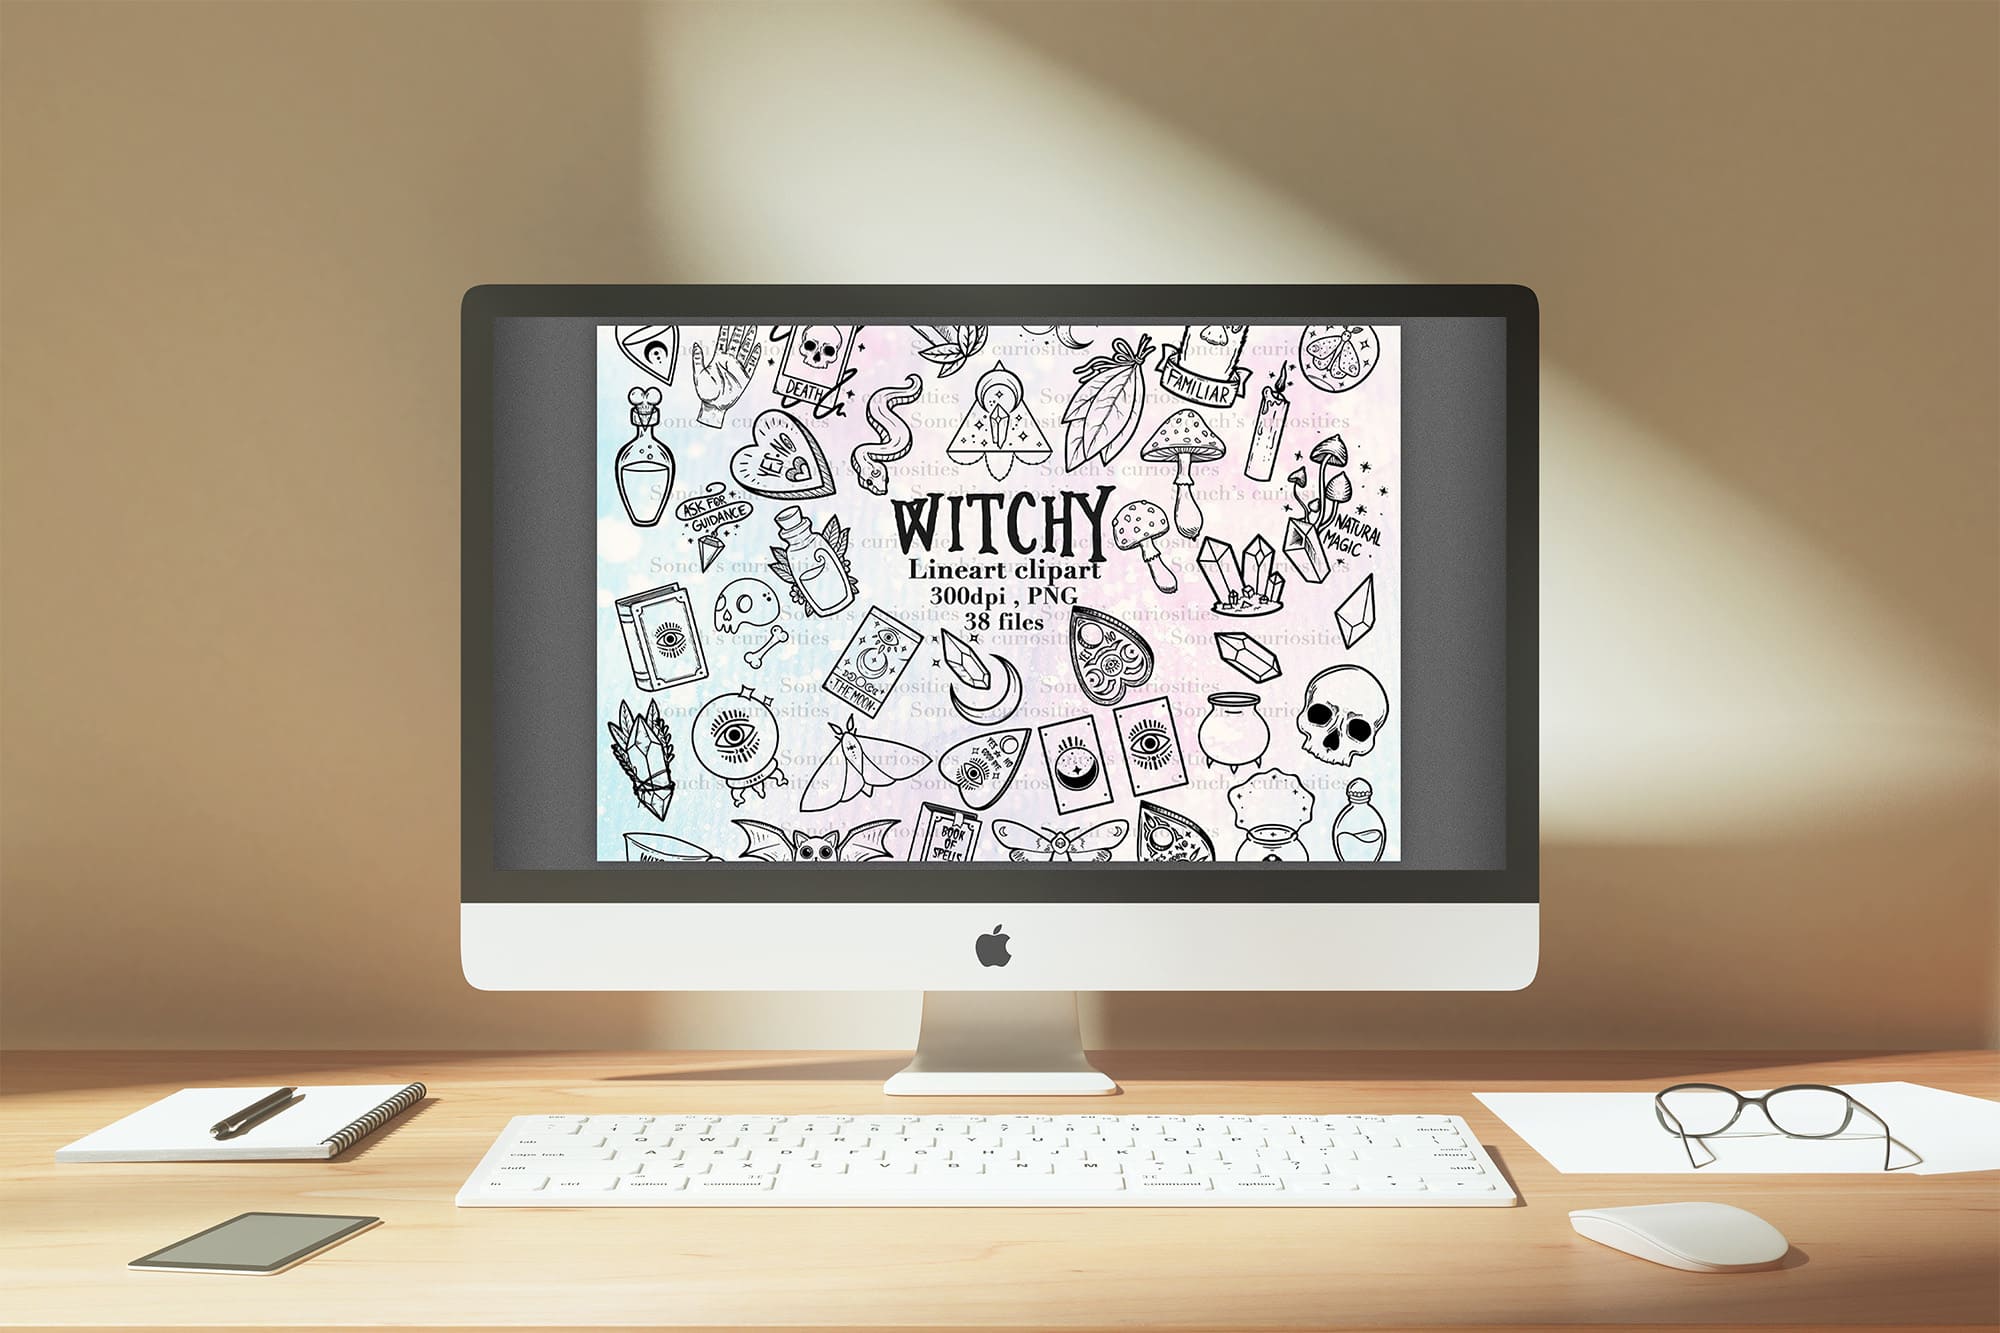 witch inspired linear clipart desktop mockup.